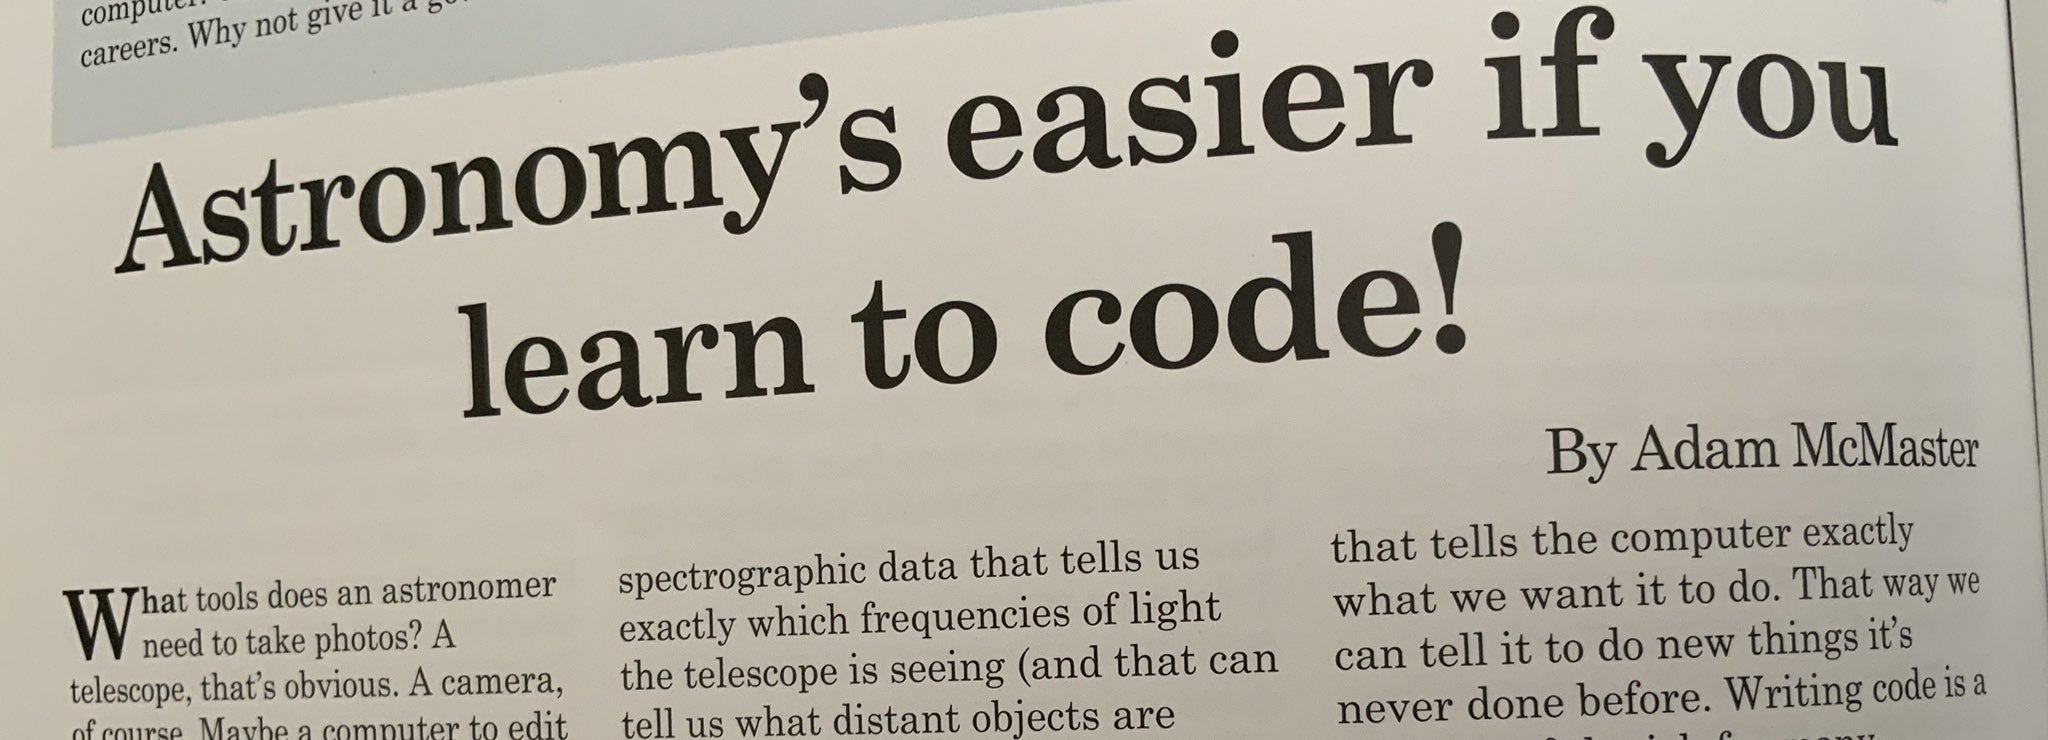 A photograph of the article headline: Astronomy's easier if you learn to code!